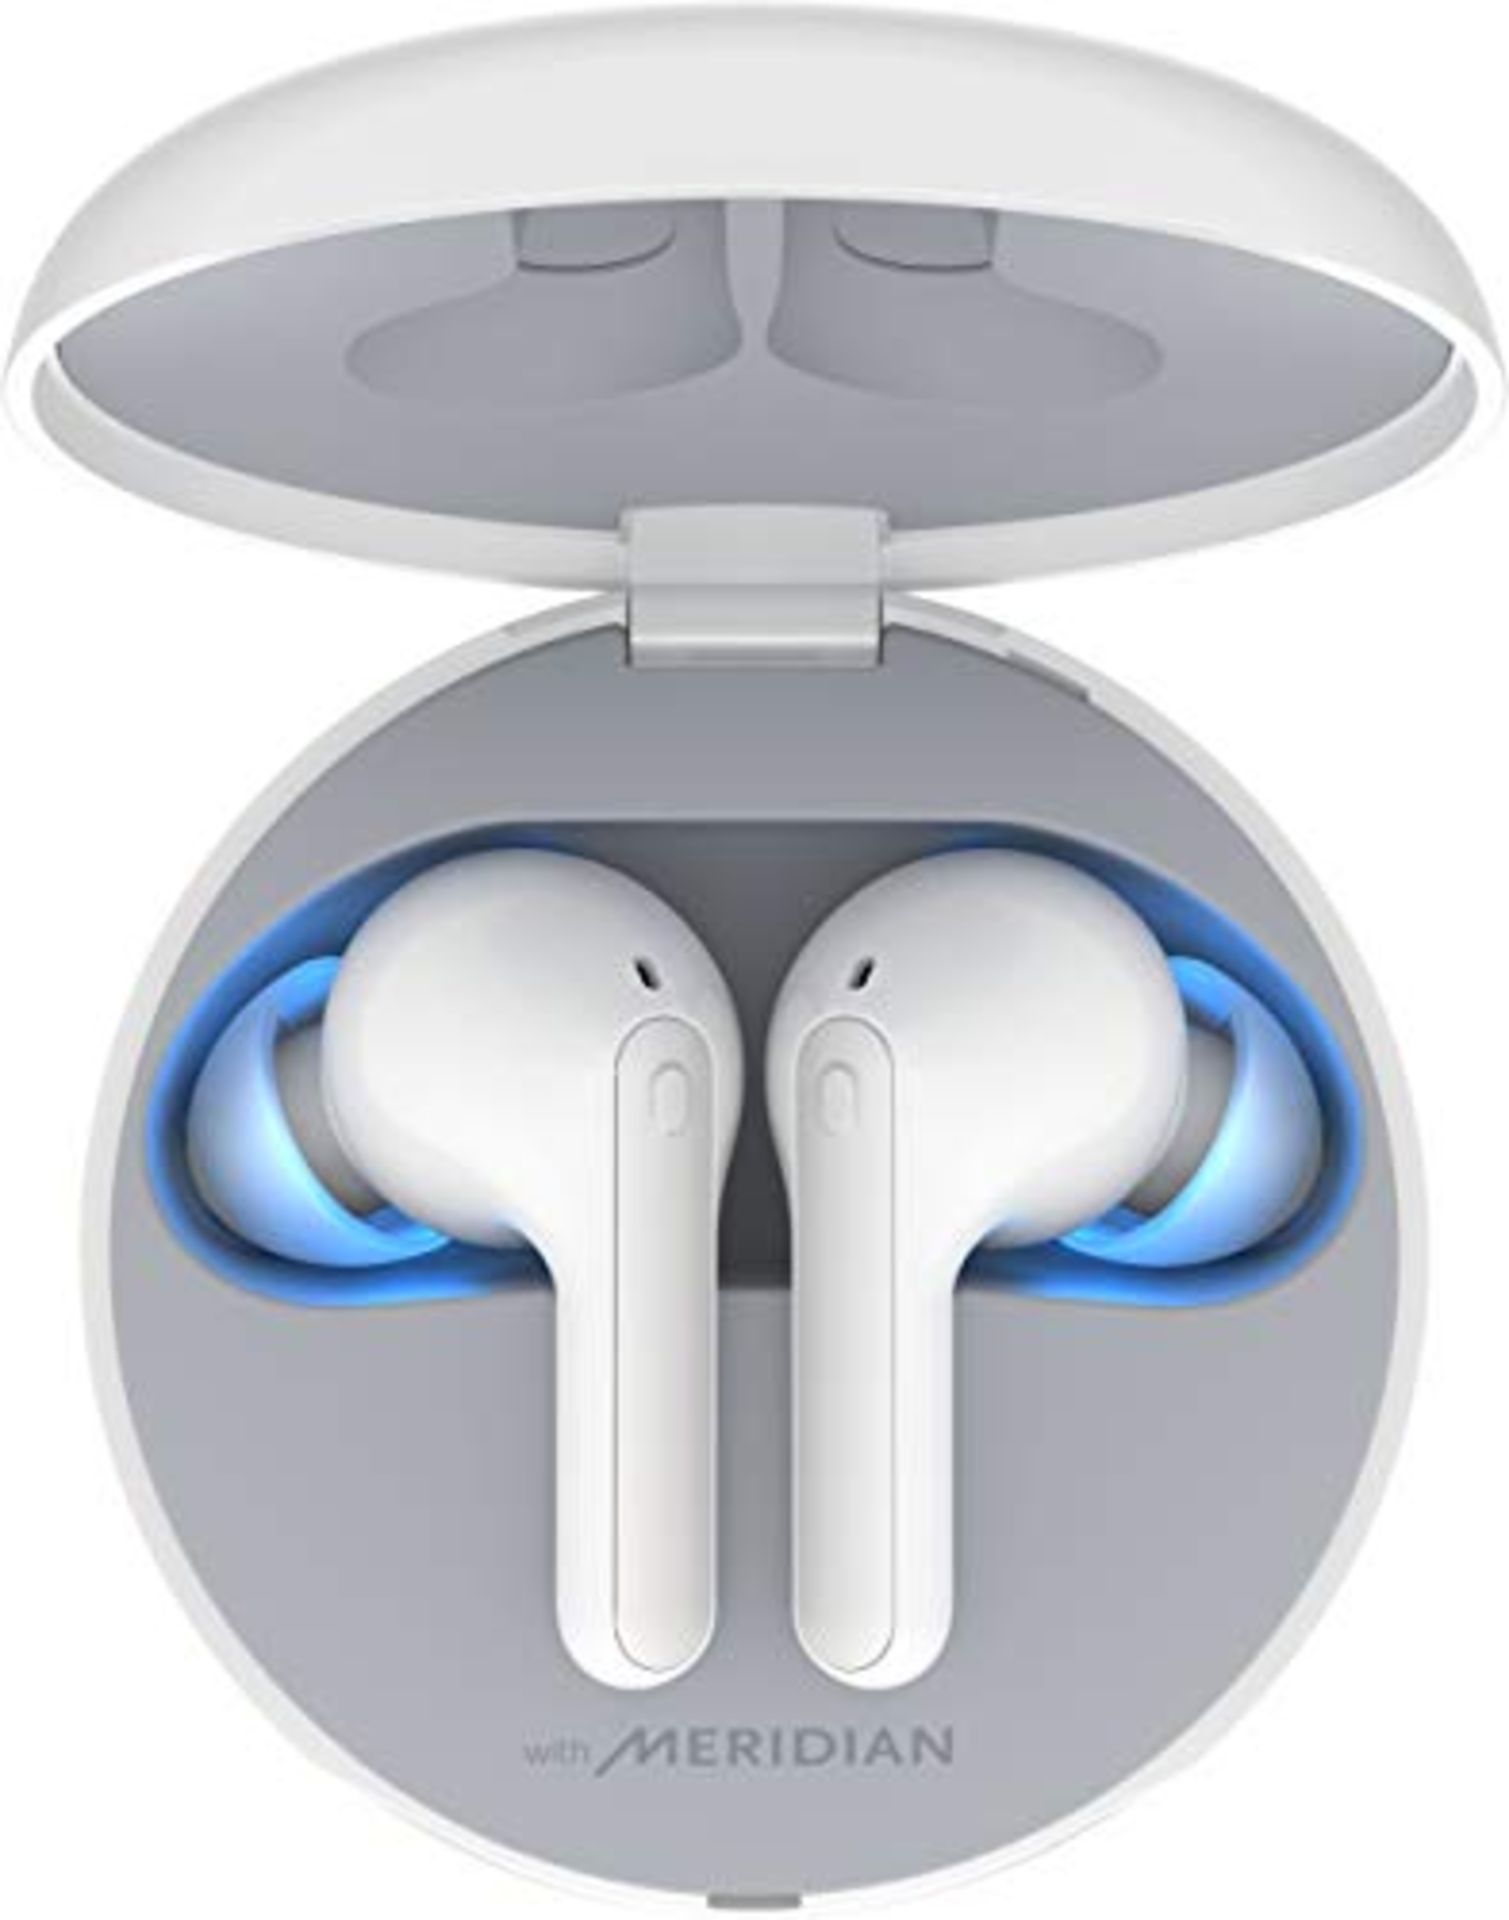 RRP £130.00 LG Bluetooth Wireless In Ear TONE Free FN7 White Headphones with Active Noise Cancella